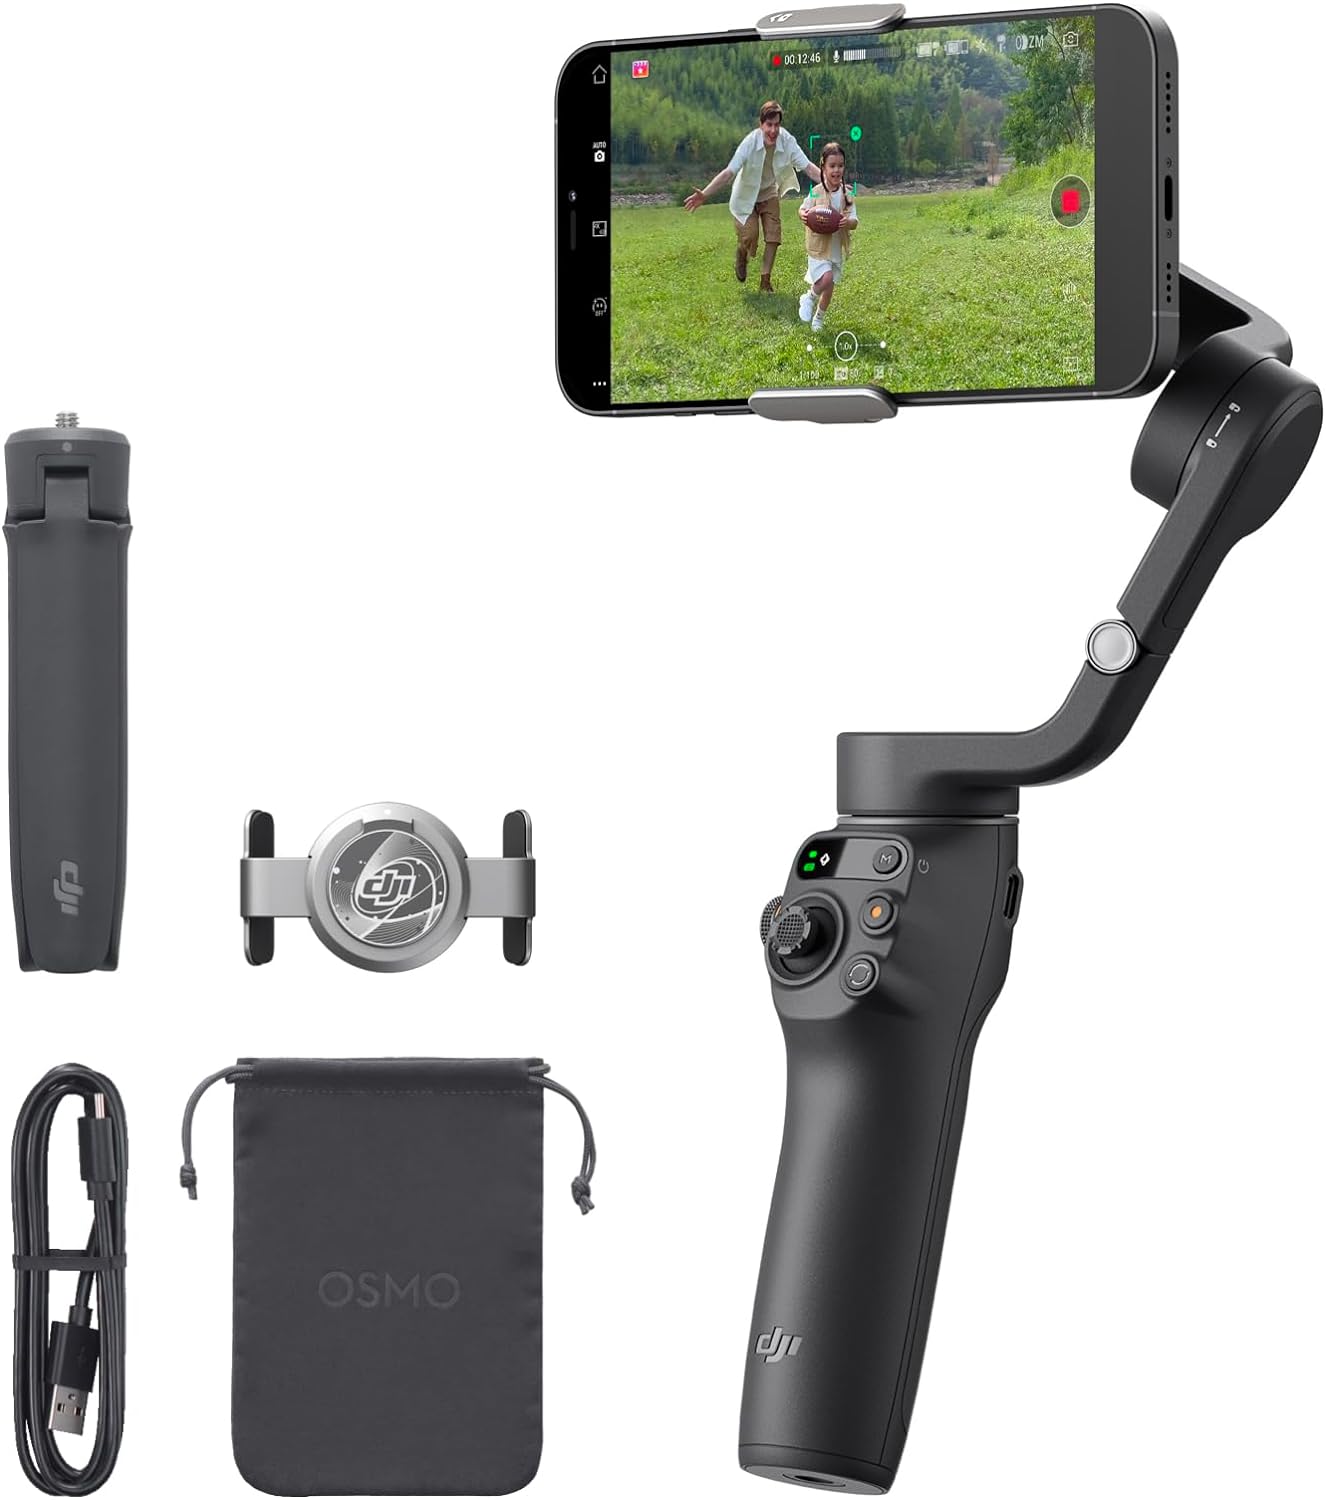 Essential Accessories for Android/iPhone Filming While Traveling